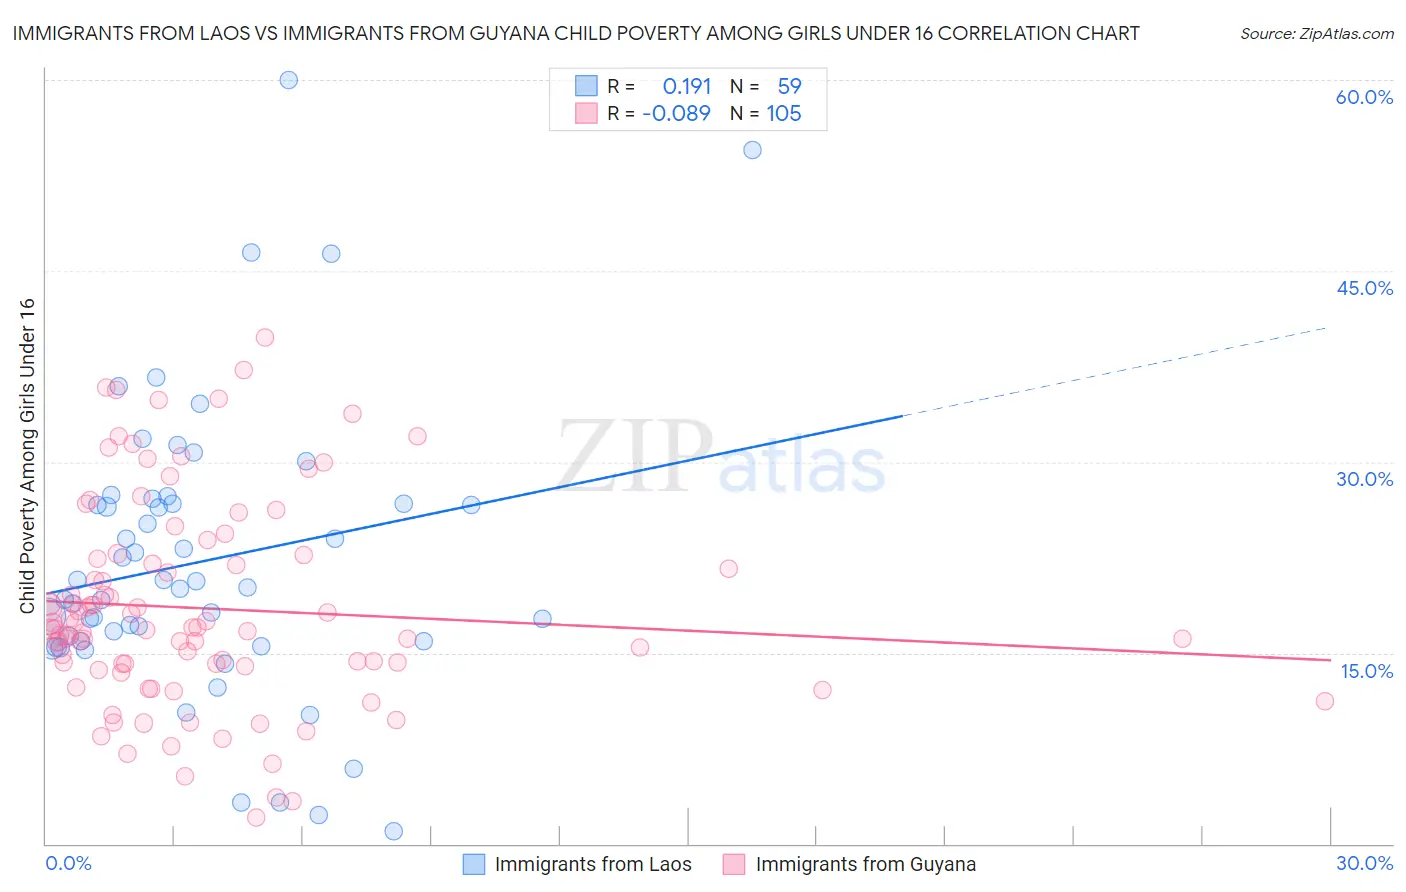 Immigrants from Laos vs Immigrants from Guyana Child Poverty Among Girls Under 16